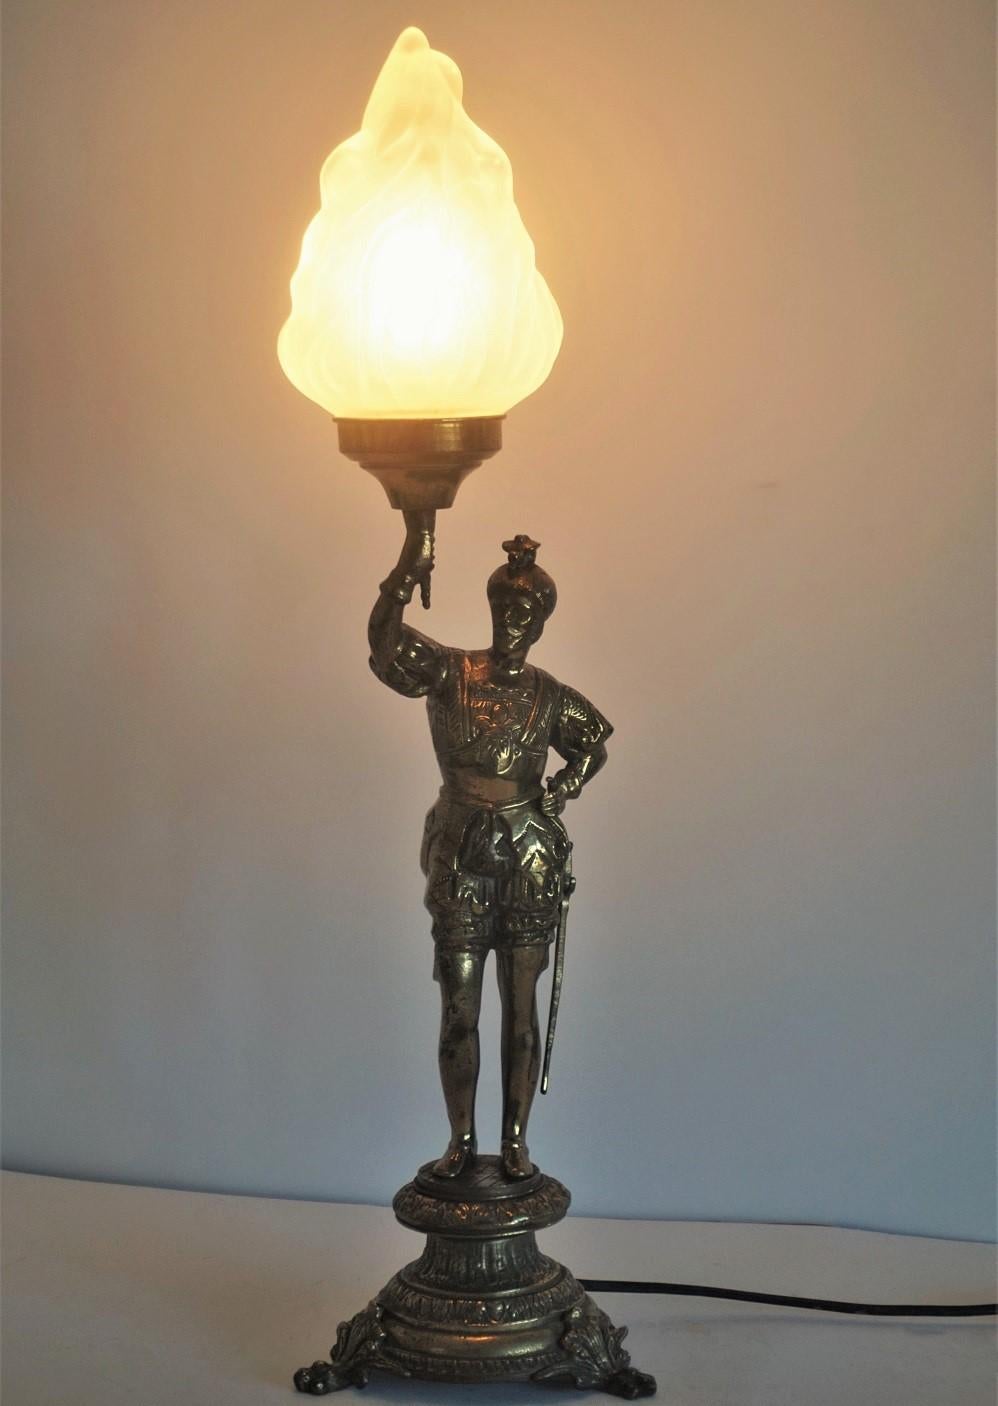 A solid bronze parcel brass knight sculpture candelabra later converted to electrified table lamp with large frosted glass torch flame shade.
It takes on Edison E27 light bulb.
Total height: 23.75 in (60 cm)
Diameter: 6.25 in (16 cm)
Height